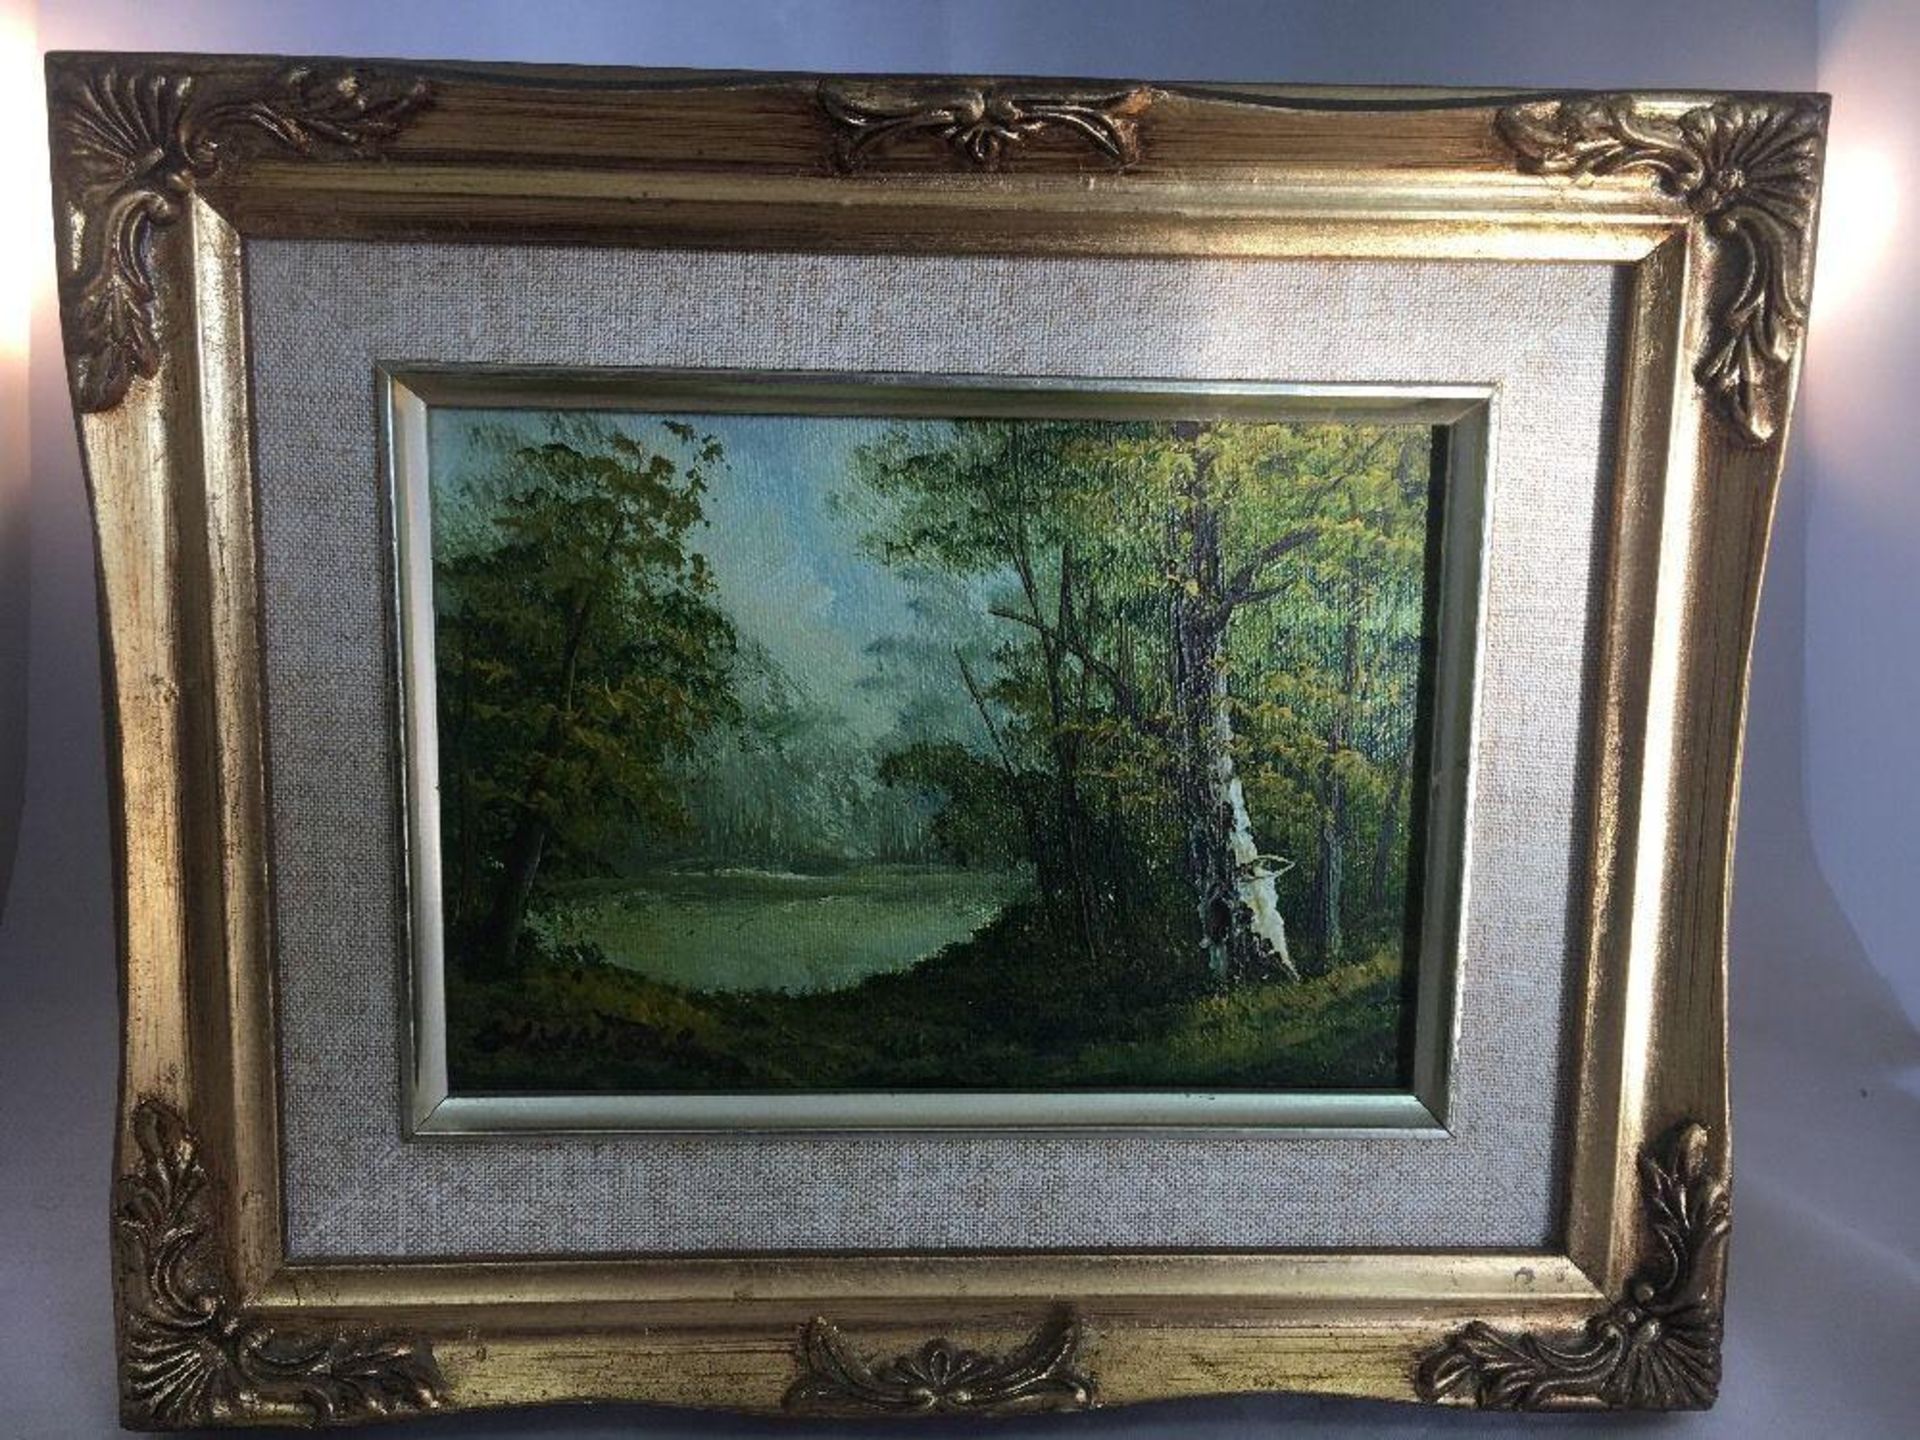 C. INNESS (1874 - 1932) FRAMED OIL PAINTING OF COUNTRY LANDSCAPE. The hammer price includes free